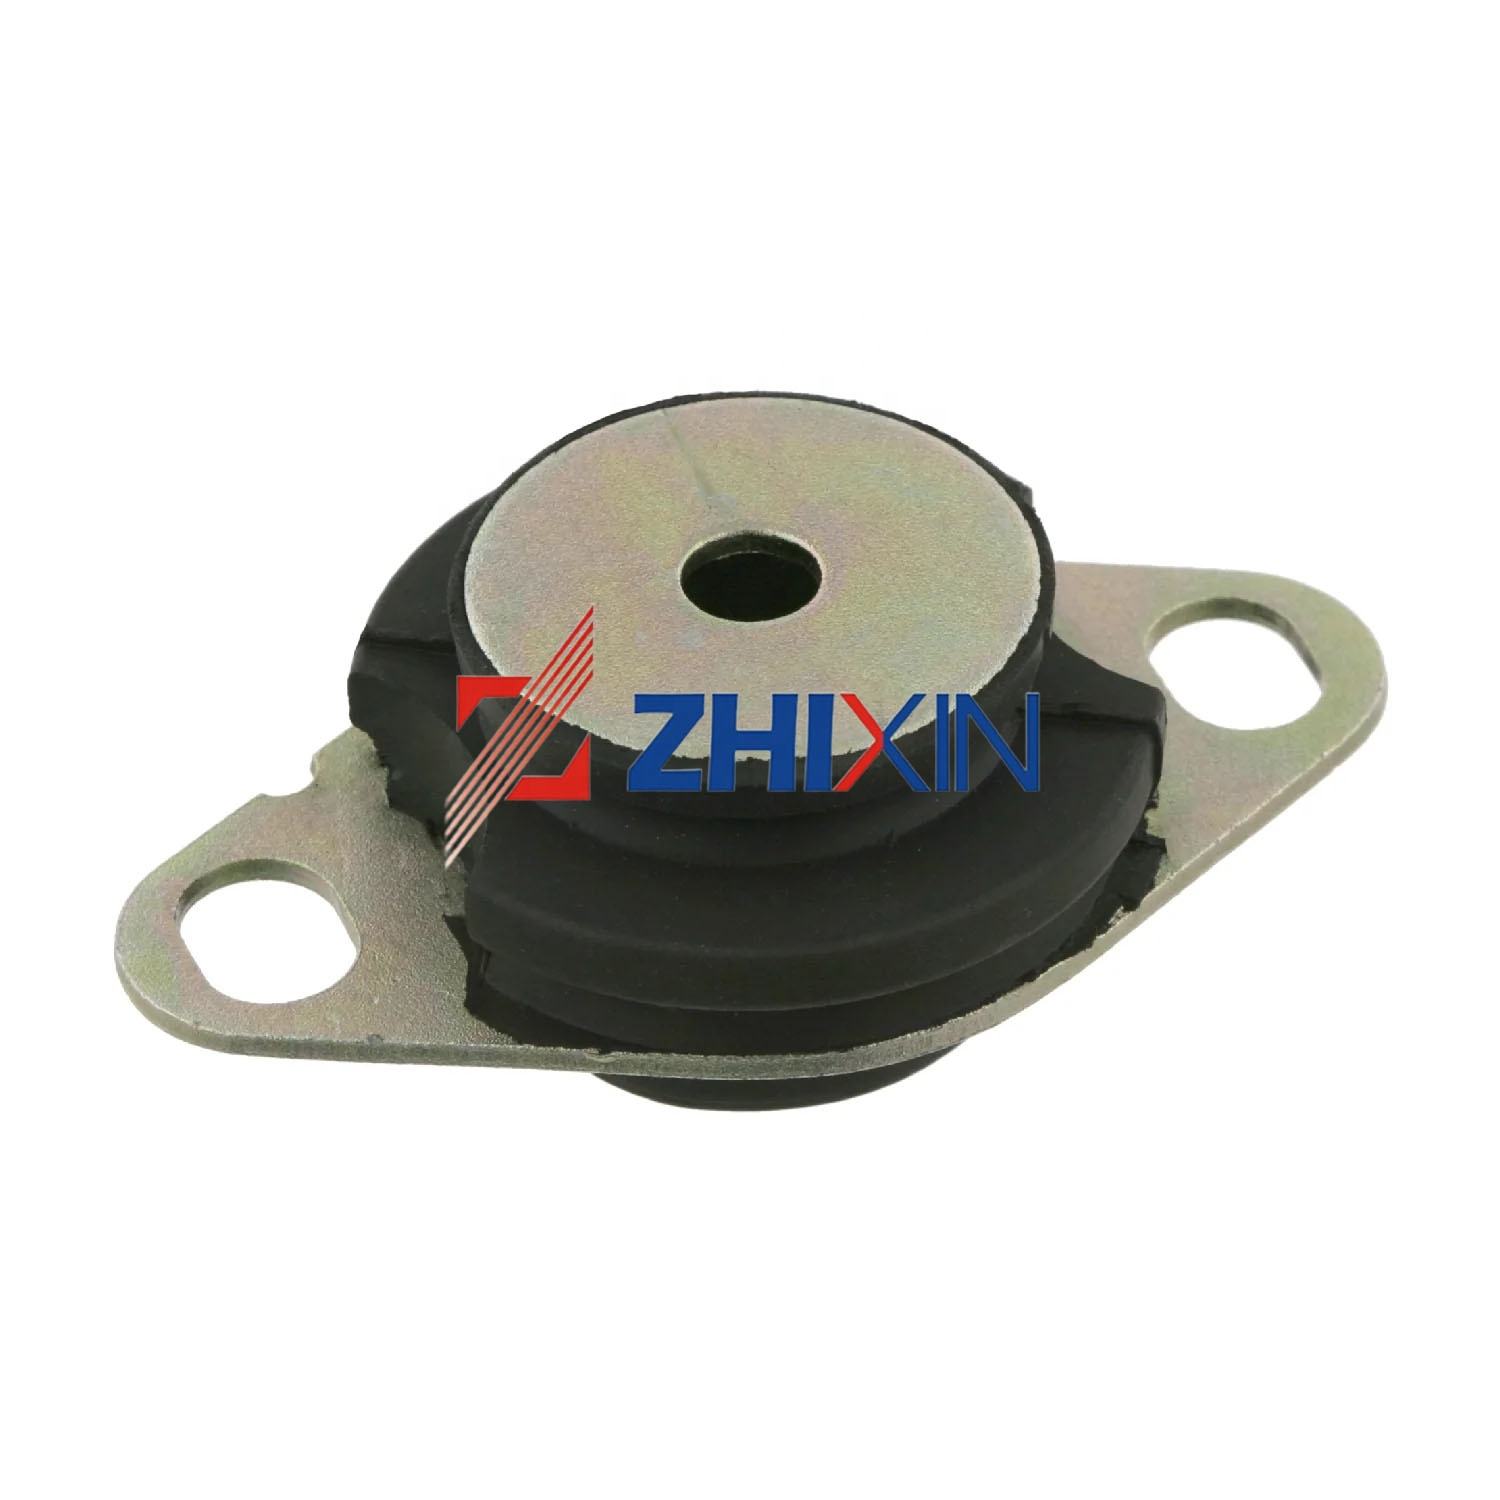 ZHIXIN Car Parts Factory Supply Engine Mounting GB28840 8200089697 8200-089-697 Engine Mount with High Durability for Renault